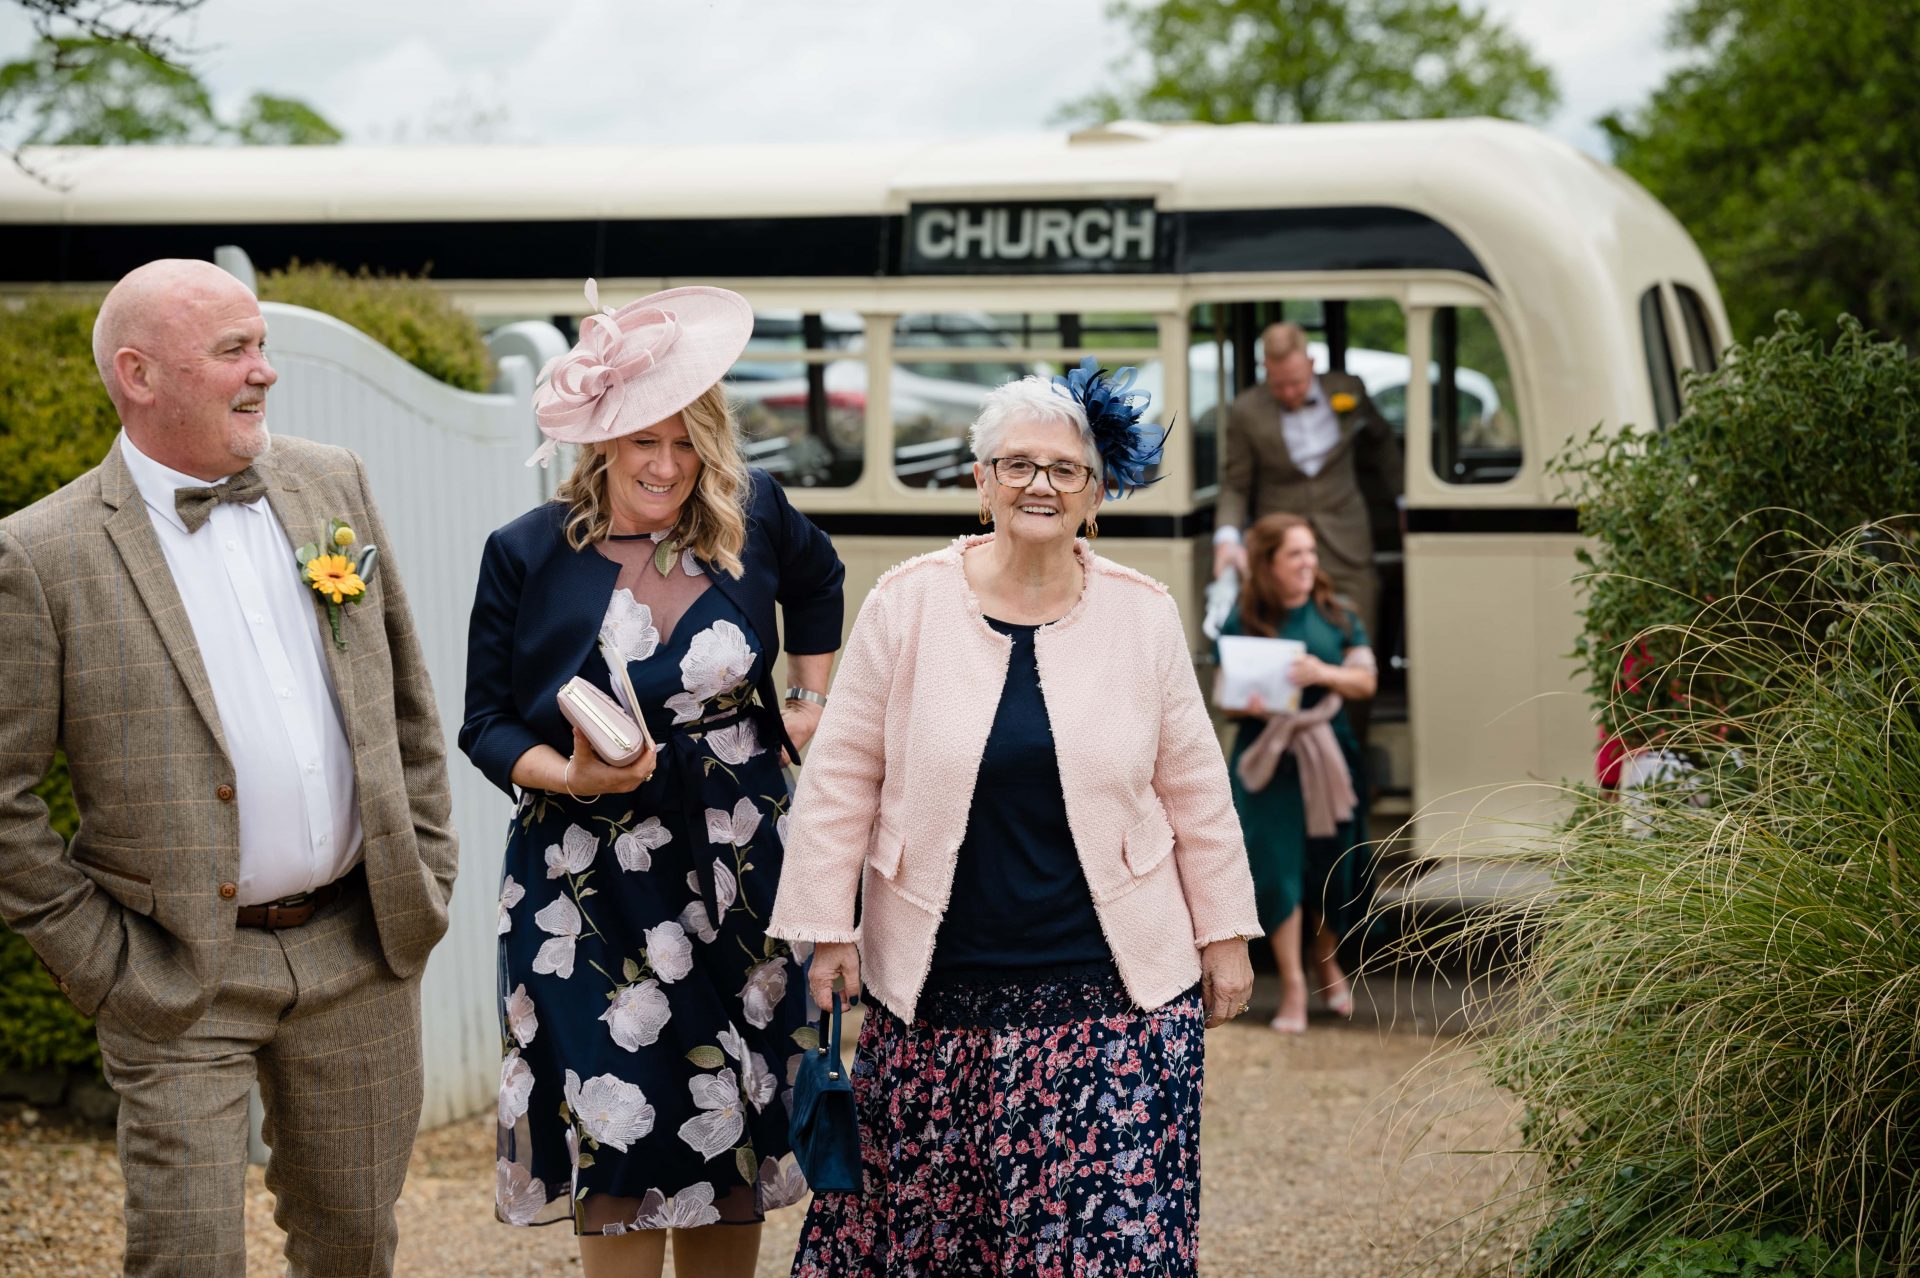 Wedding guiests arriving on a vintage bus at Hill Farm House in Brigstock